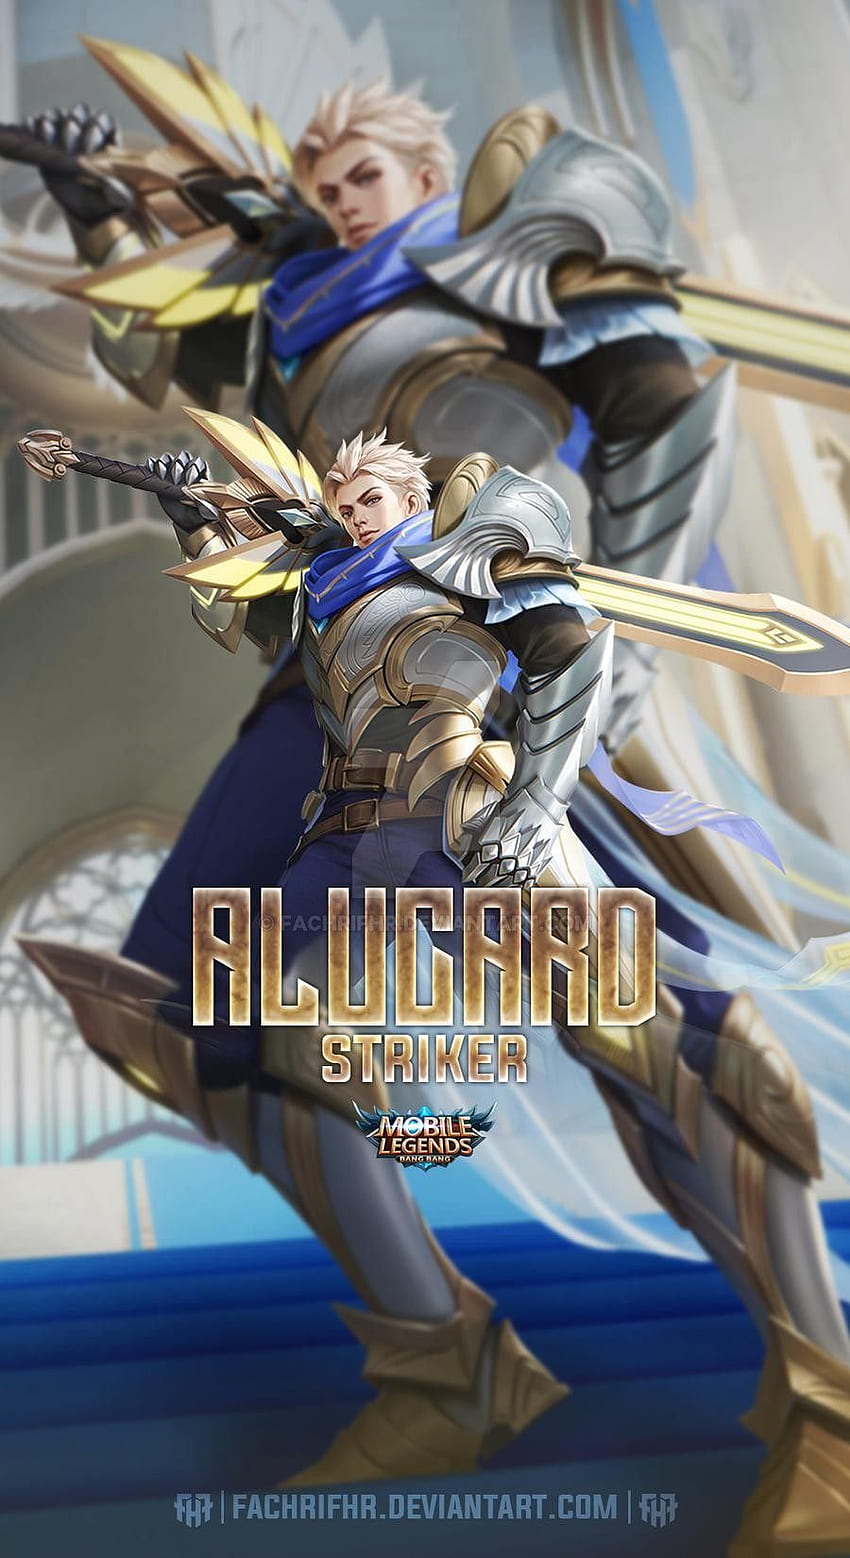 Pin by Uy Trieu on My Saves  Mobile legends, Bruno mobile legends, Alucard mobile  legends